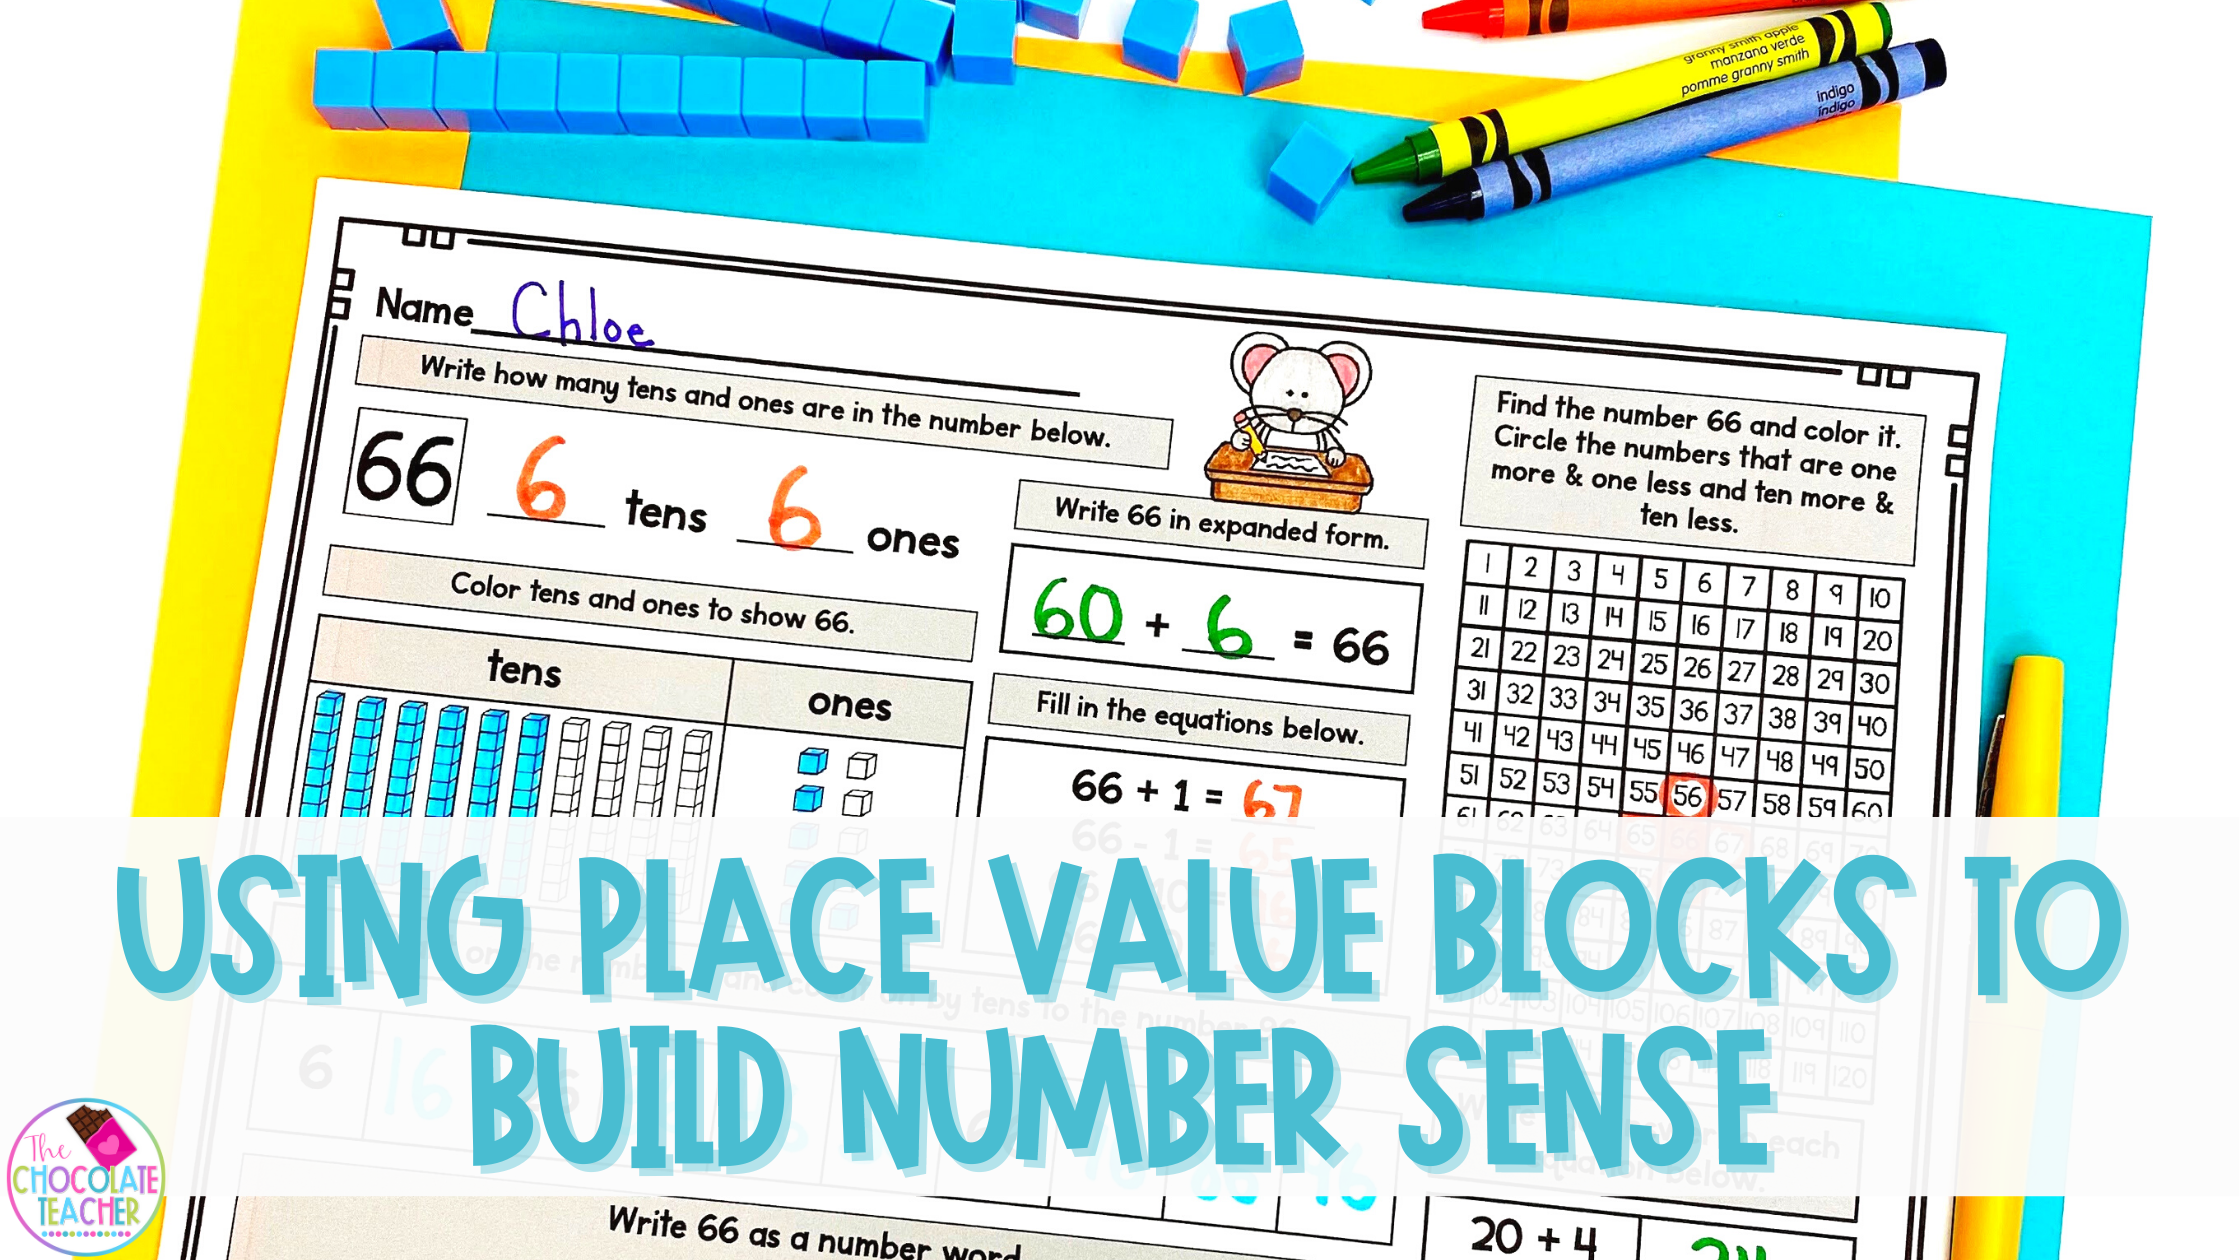 Using place value blocks to build number sense is a great hands on way to get your students excited about practicing place value.